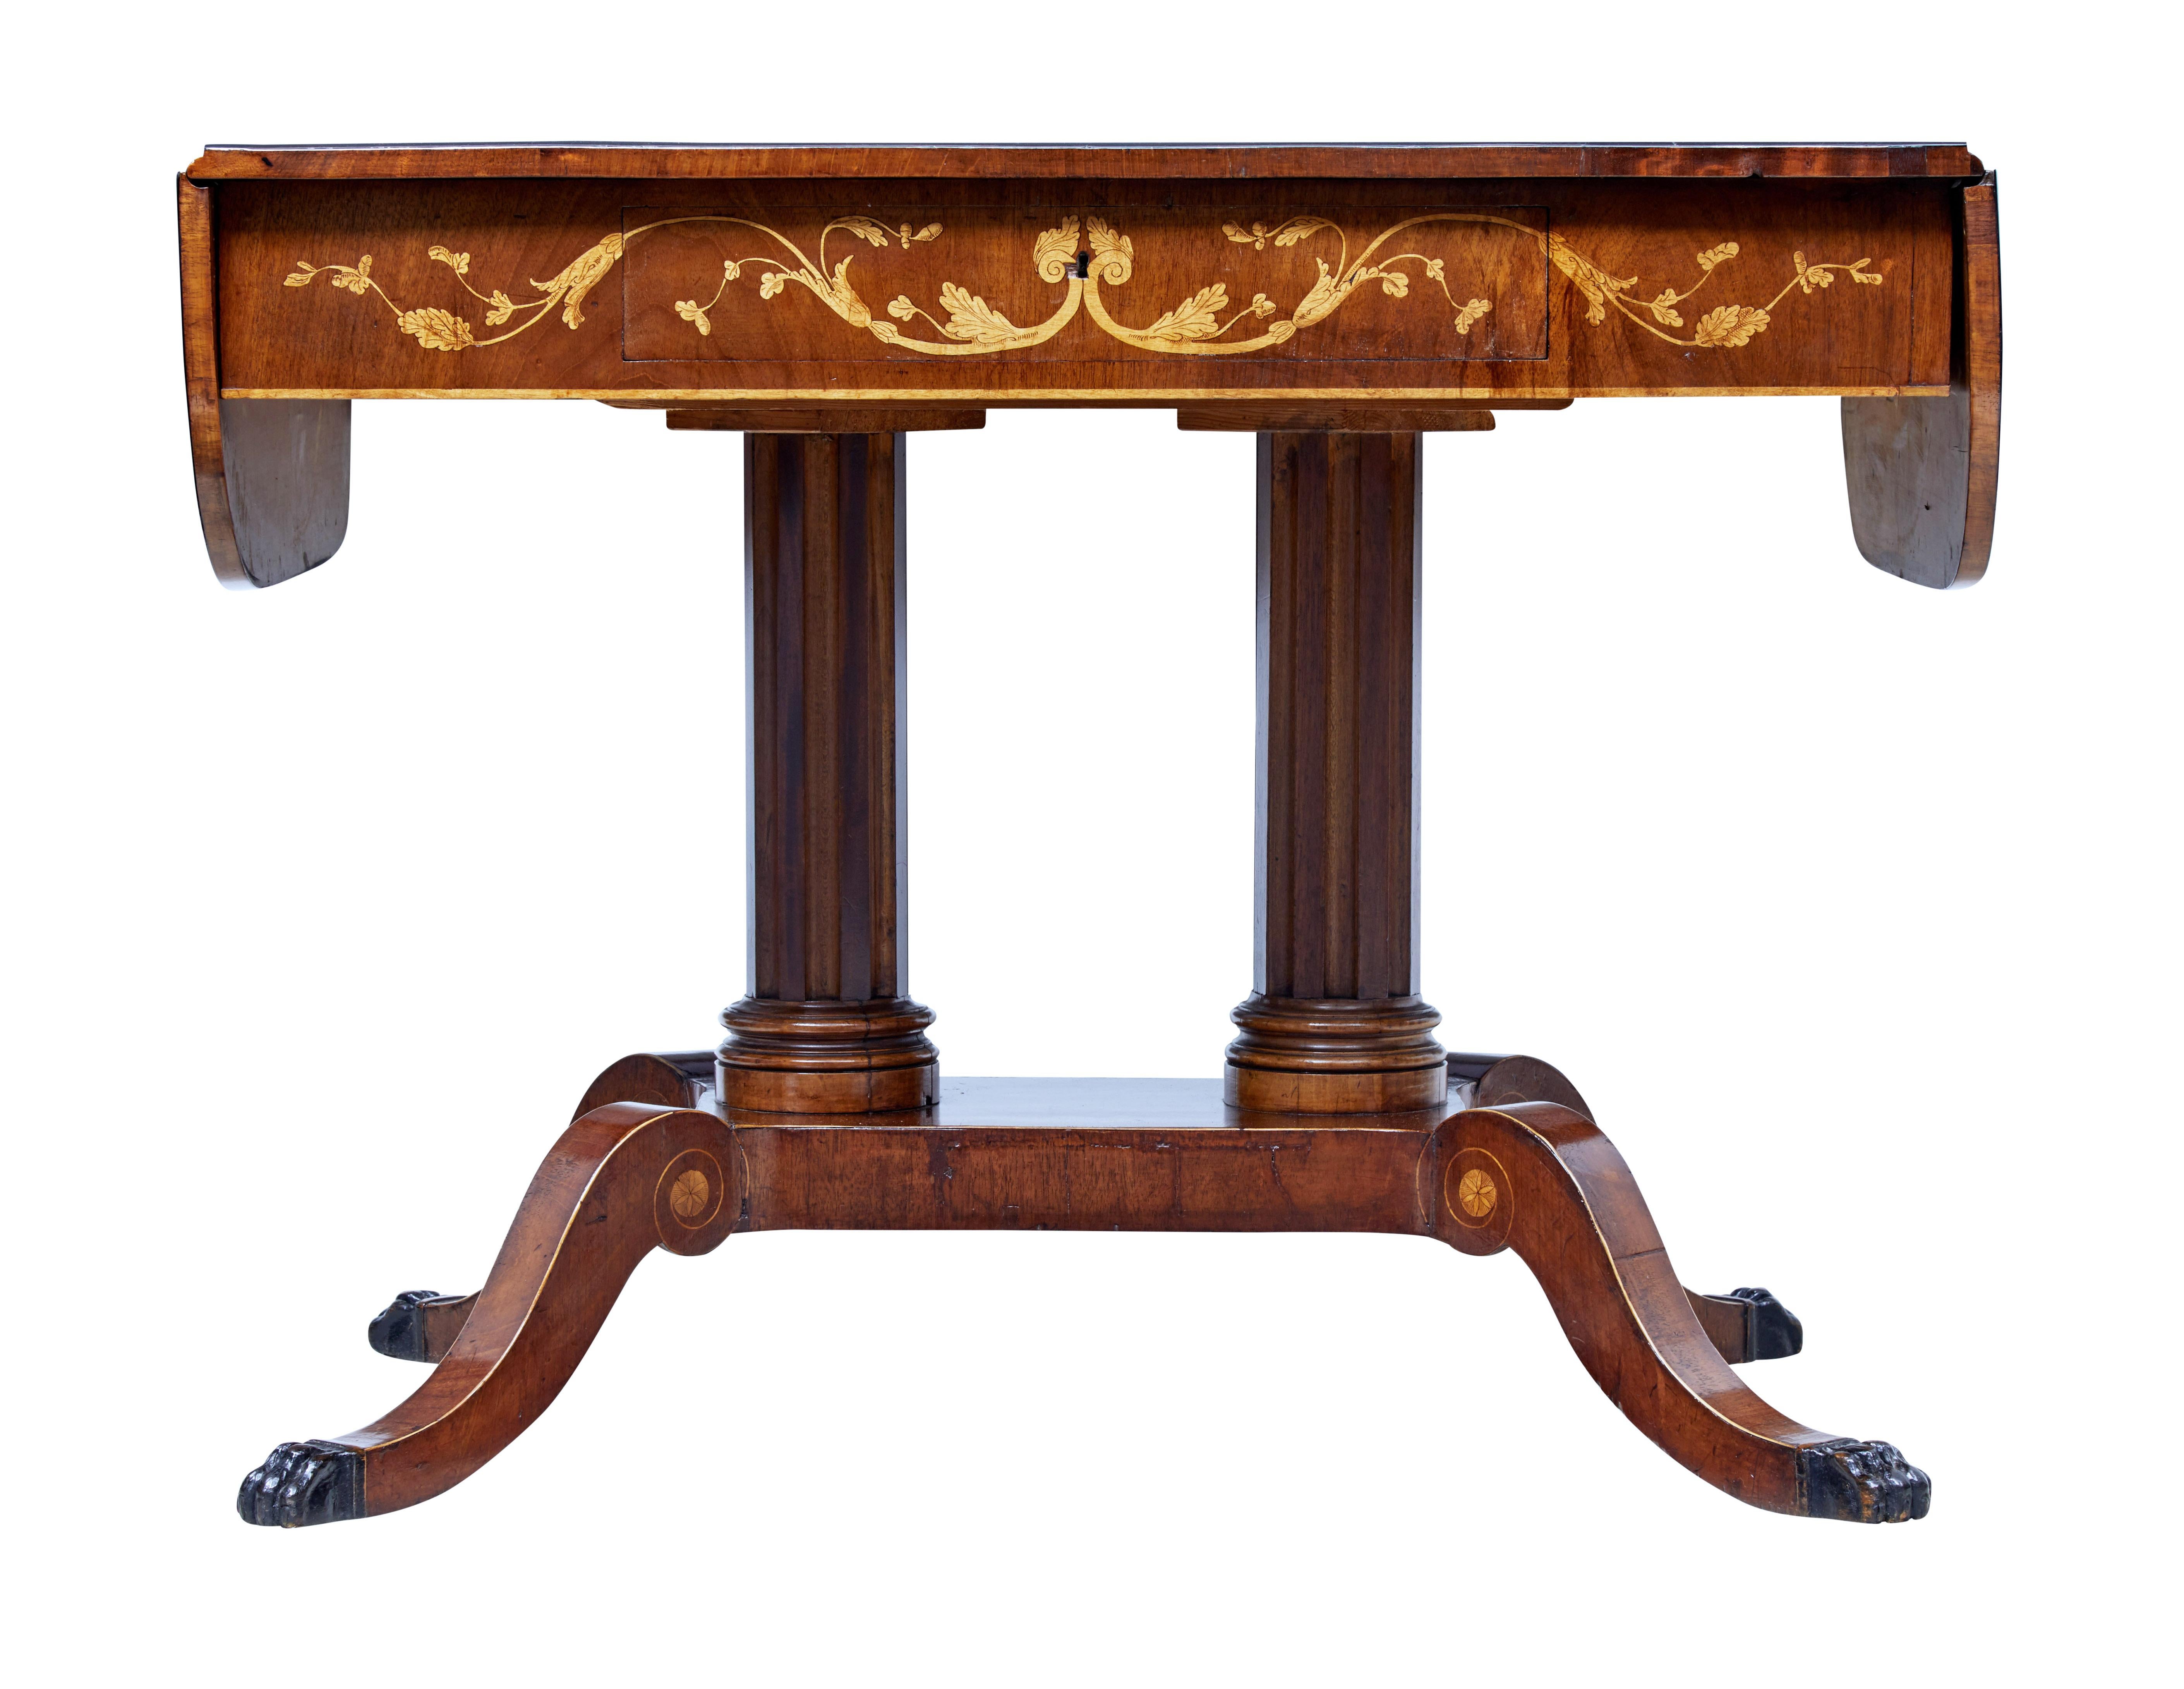 19th century Swedish mahogany inlaid sofa table, circa 1860.

Free-standing sofa table with drop down flaps. Plain mahogany top with ebonized outer edge. Single drawer to the front with birch swag inlay, which is repeated on the